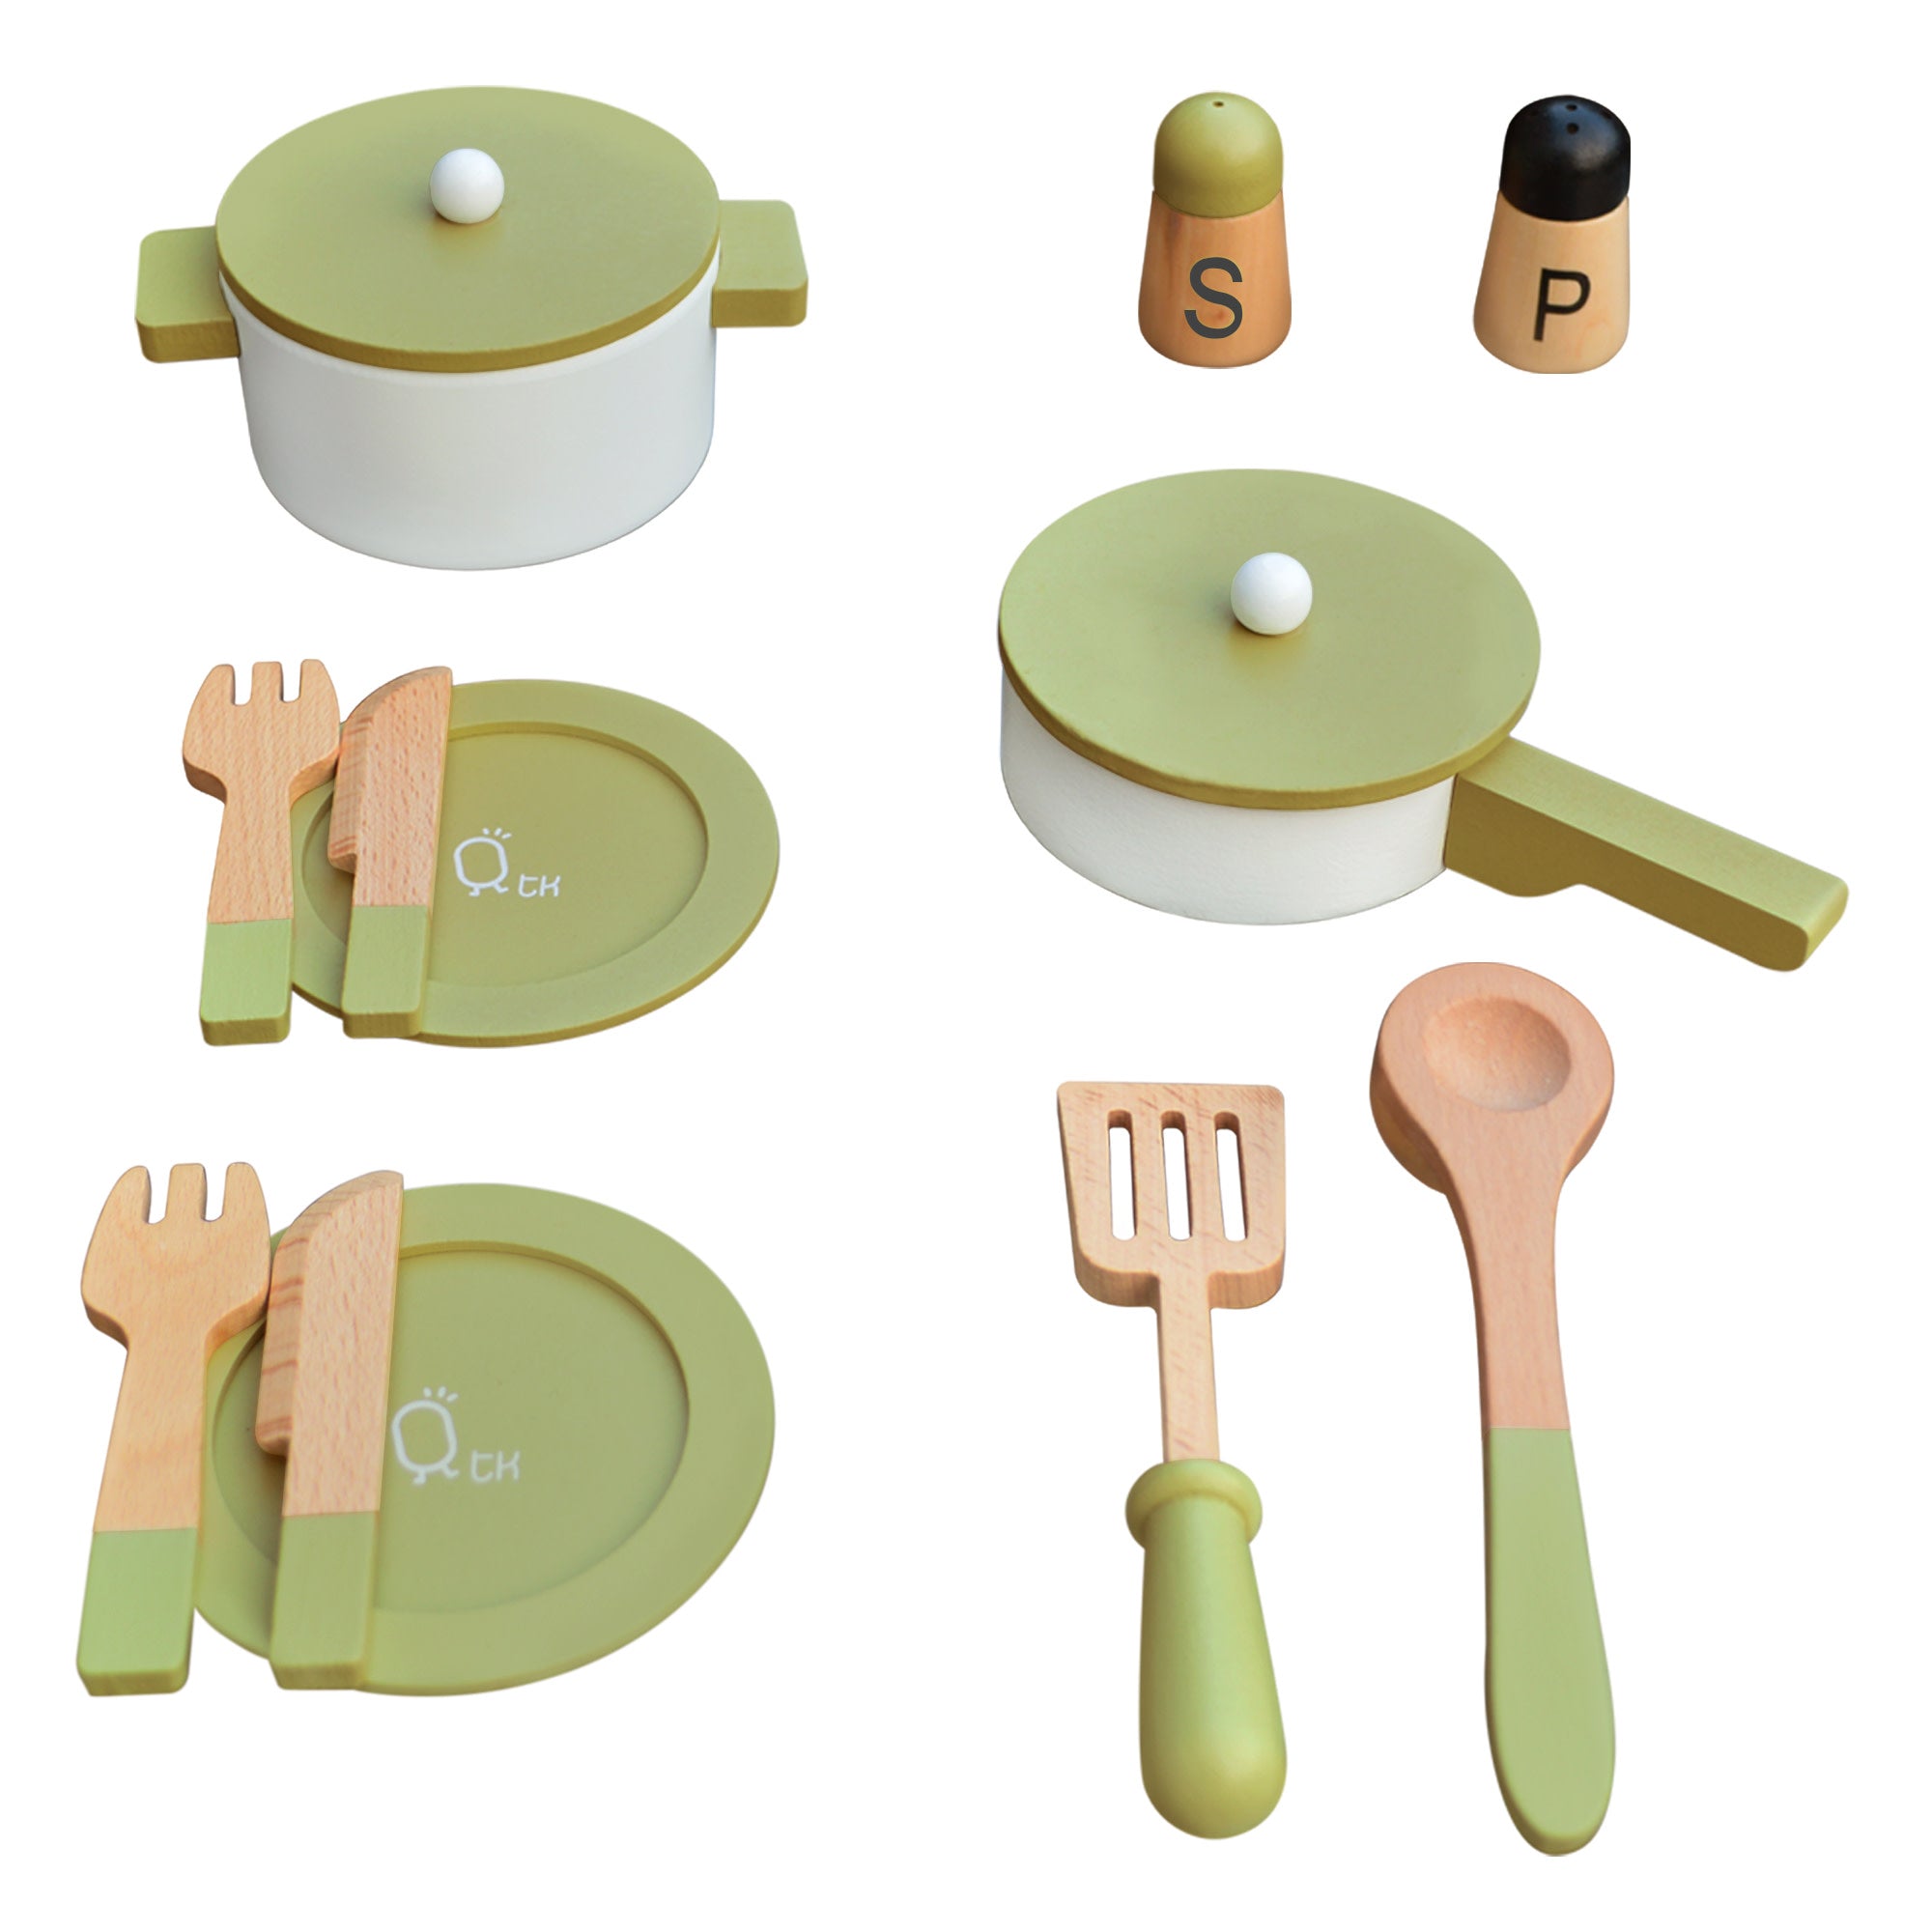 Shop All Cookware and Bakeware Sets, Kitchen Accessories